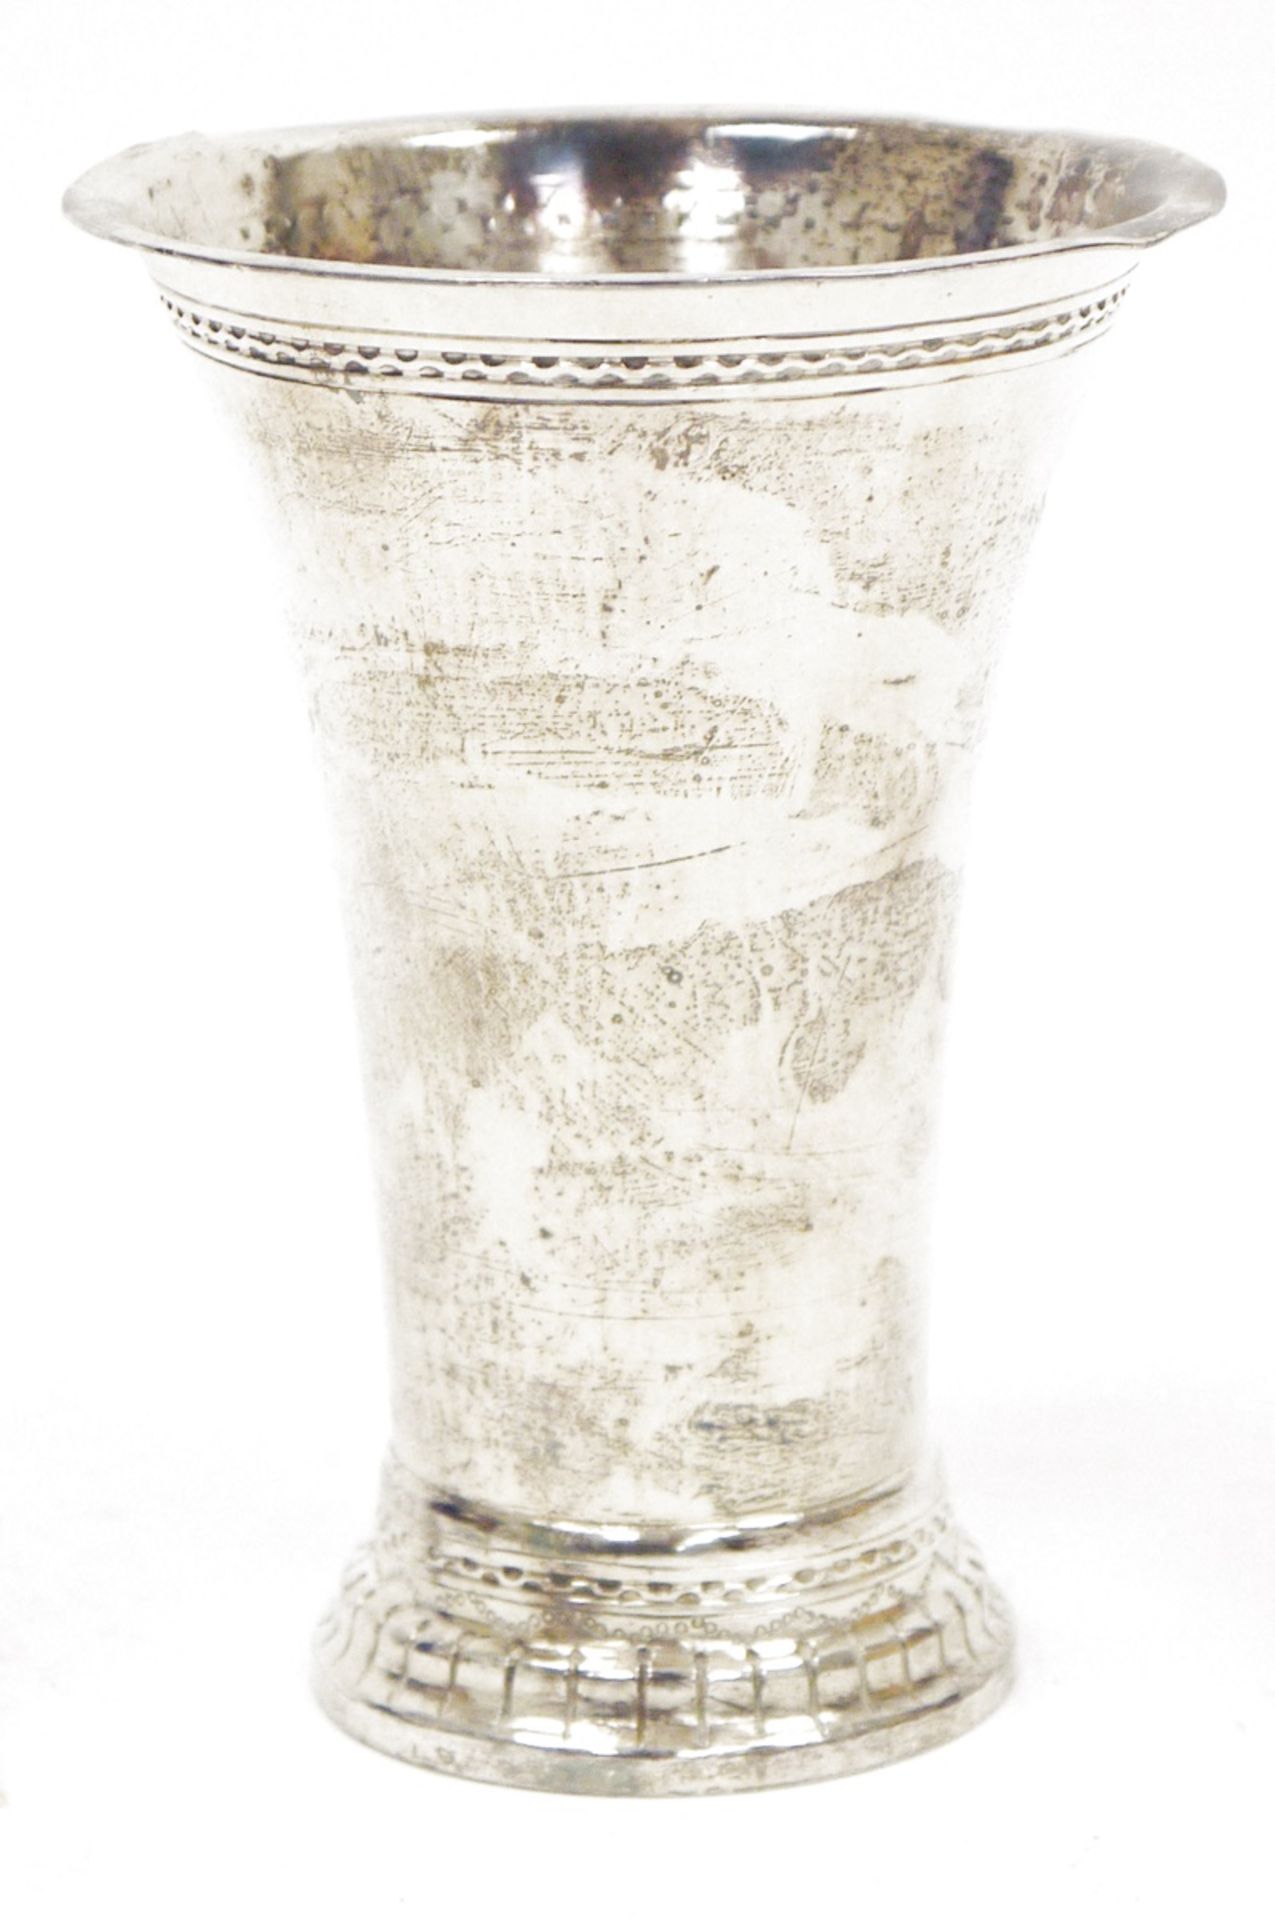 Early 20th century Arts & Crafts silver plated beaker by The Keswick School of Industrial Art, - Image 2 of 2